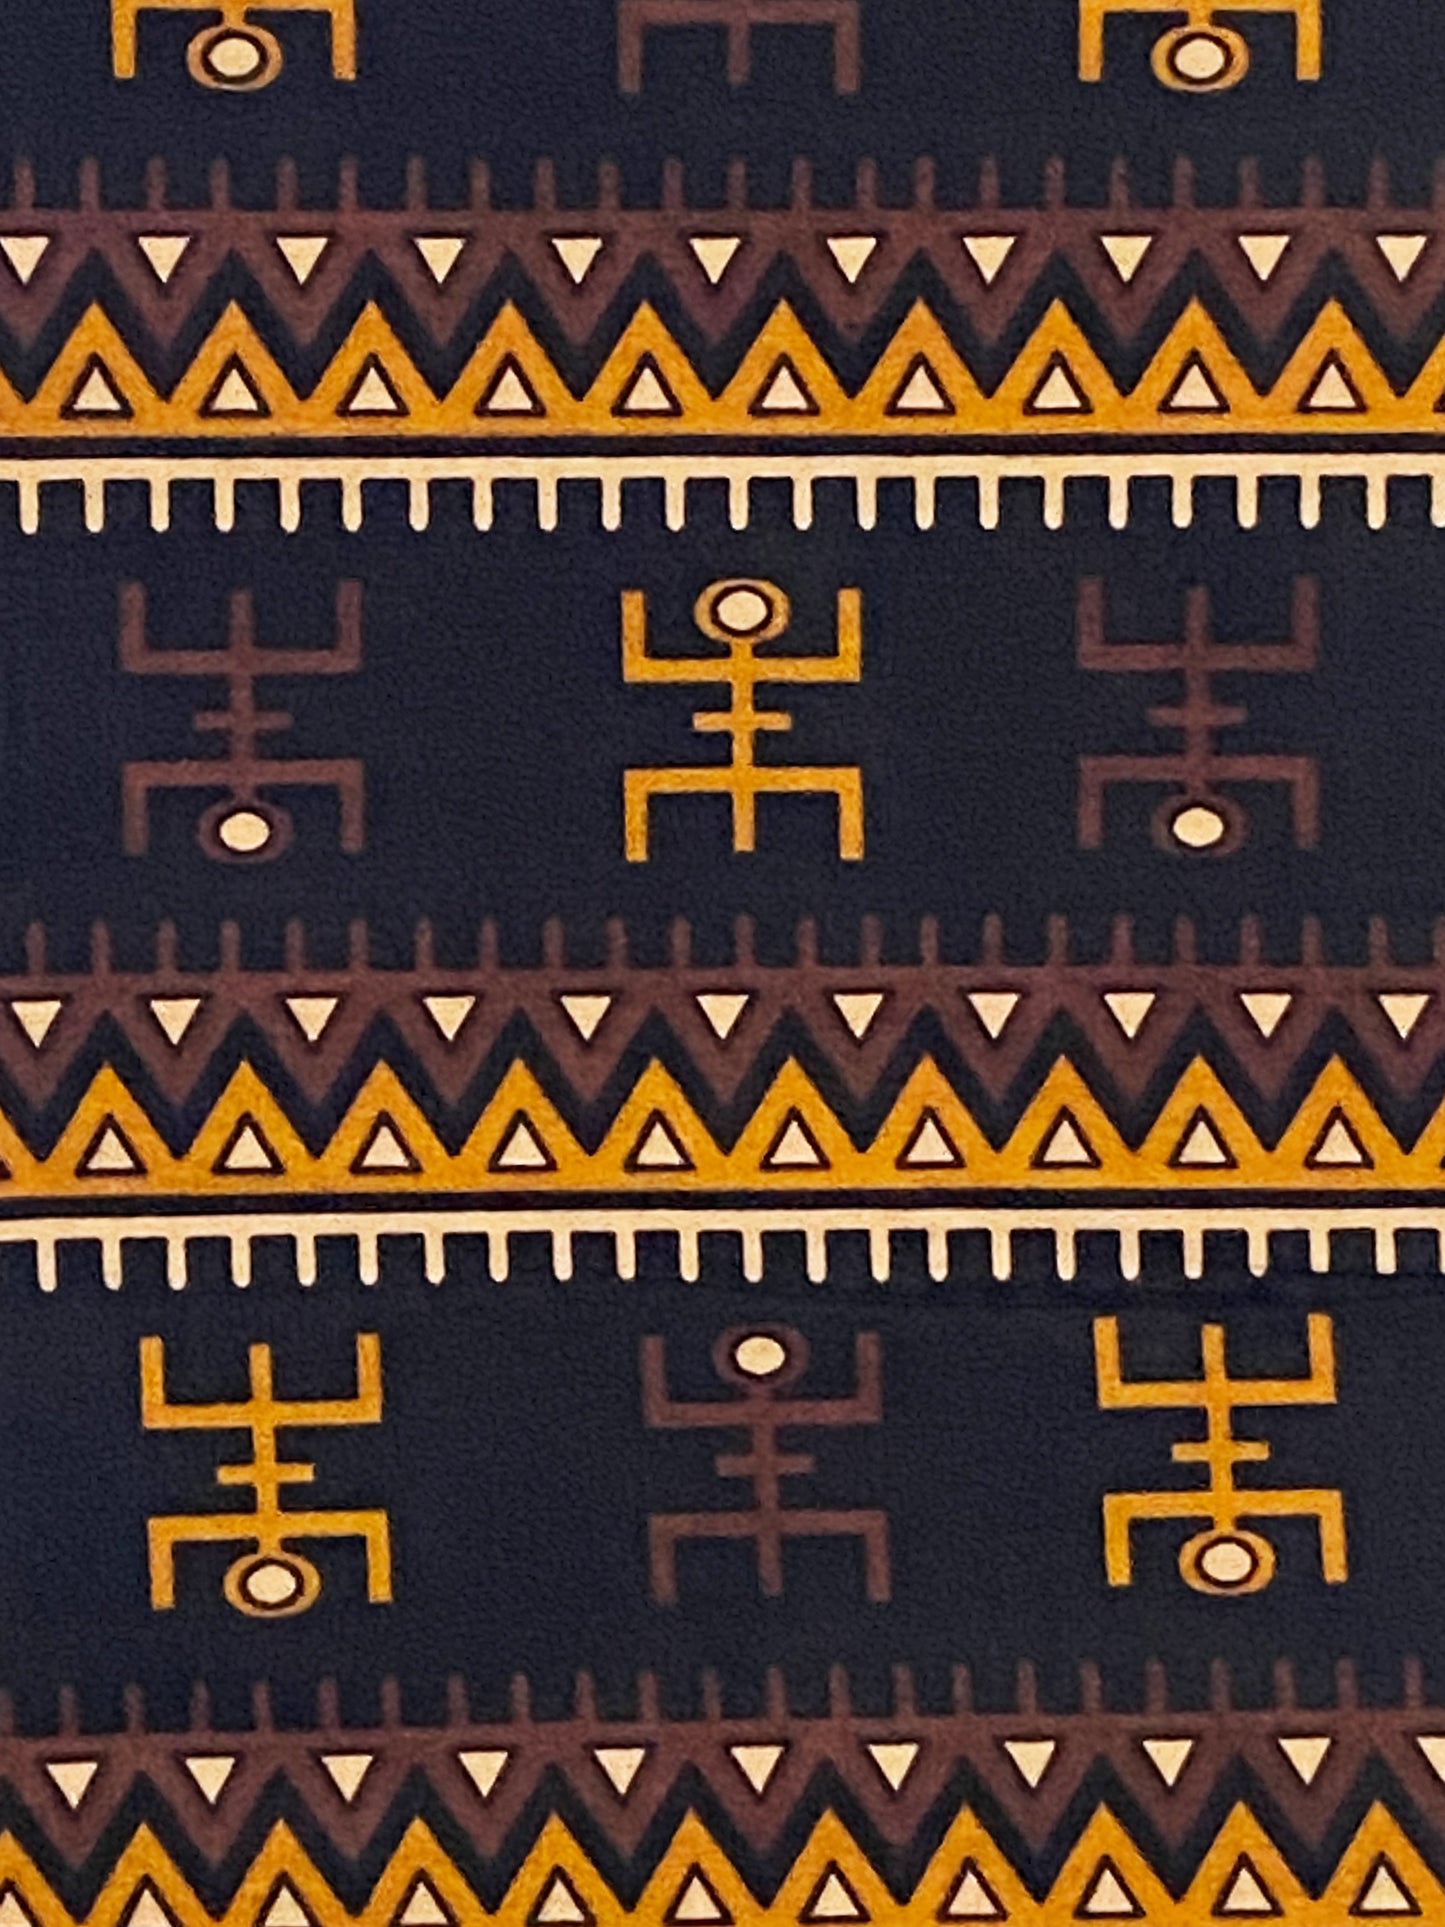 #3482 African Kente Cloth Cotton Fabric,6 Yards by 43"